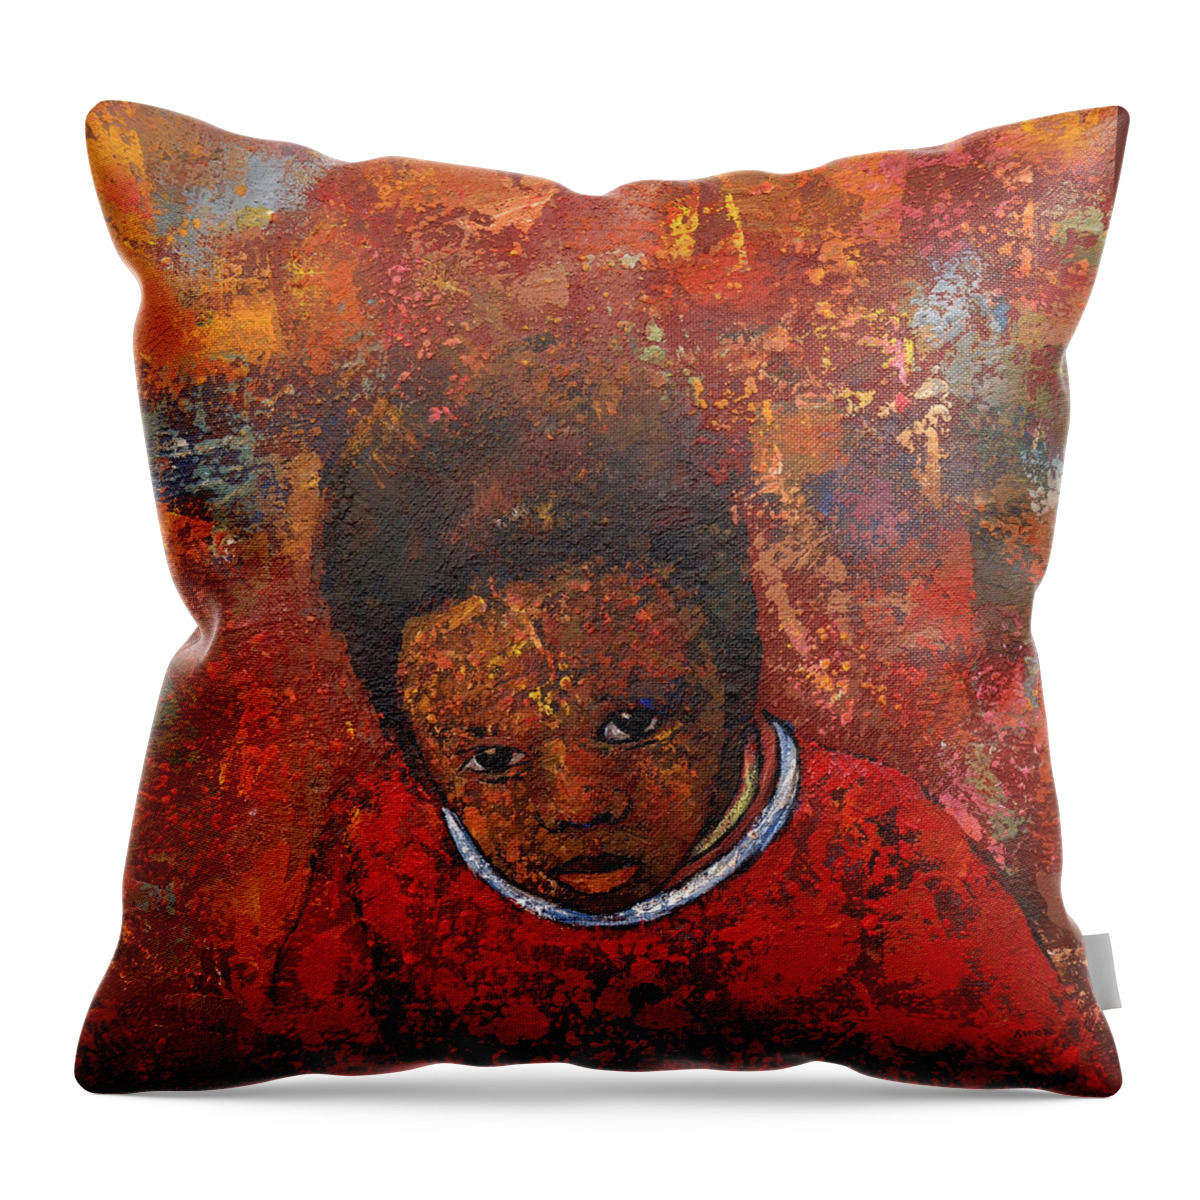 Ronexart Throw Pillow featuring the painting What Do U See by Ronex Ahimbisibwe